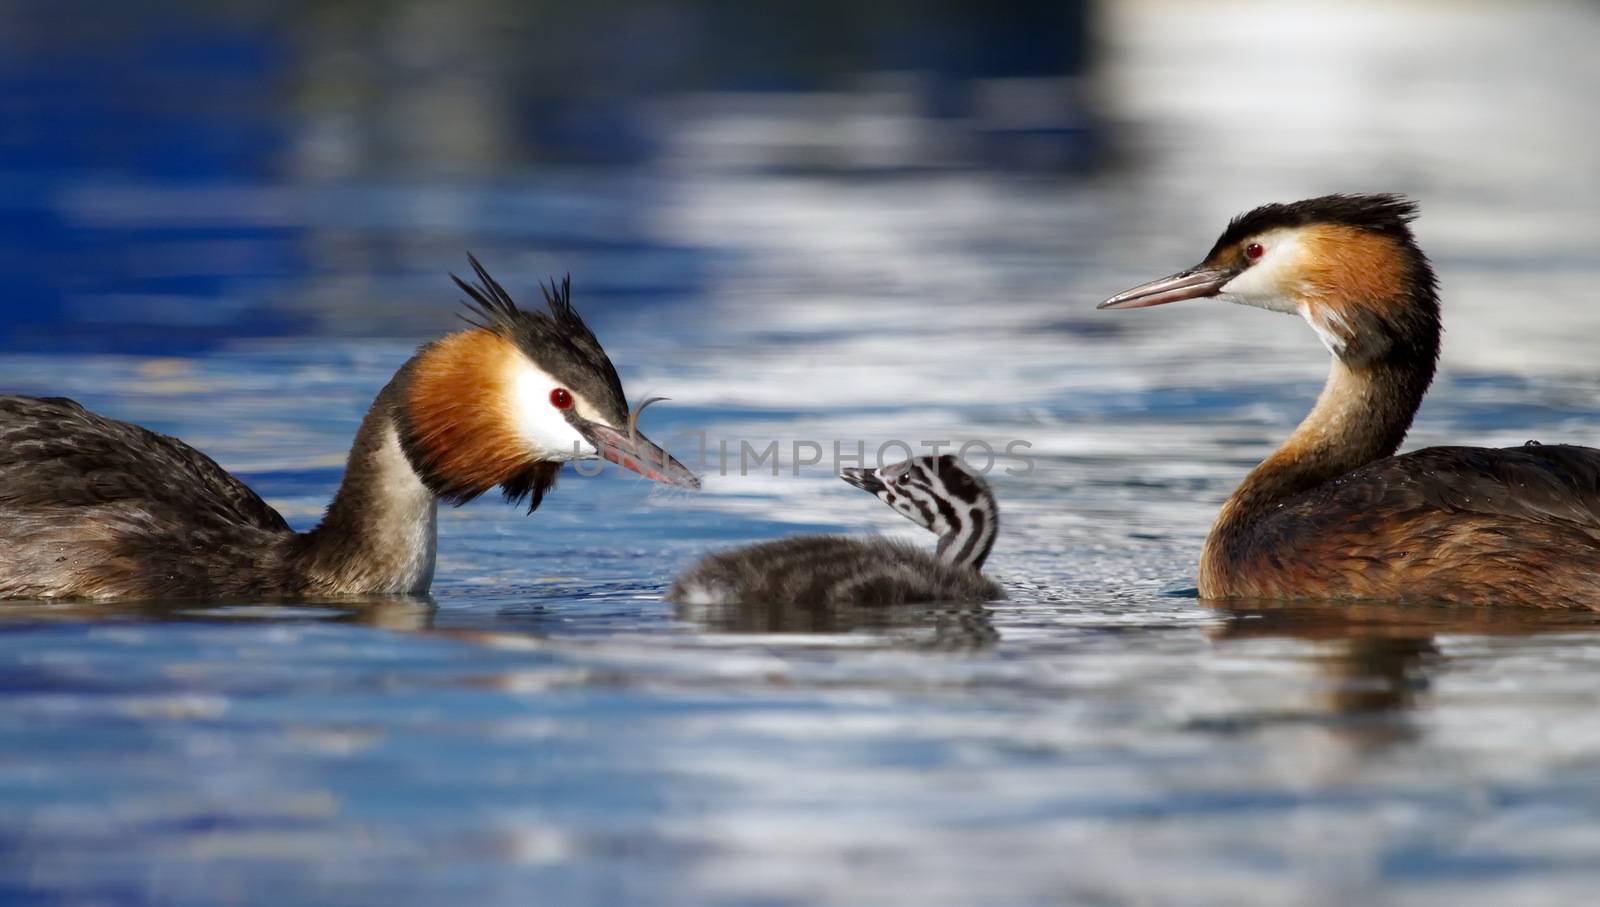 Crested grebe ducks, podiceps cristatus, parents and baby floating on water lake